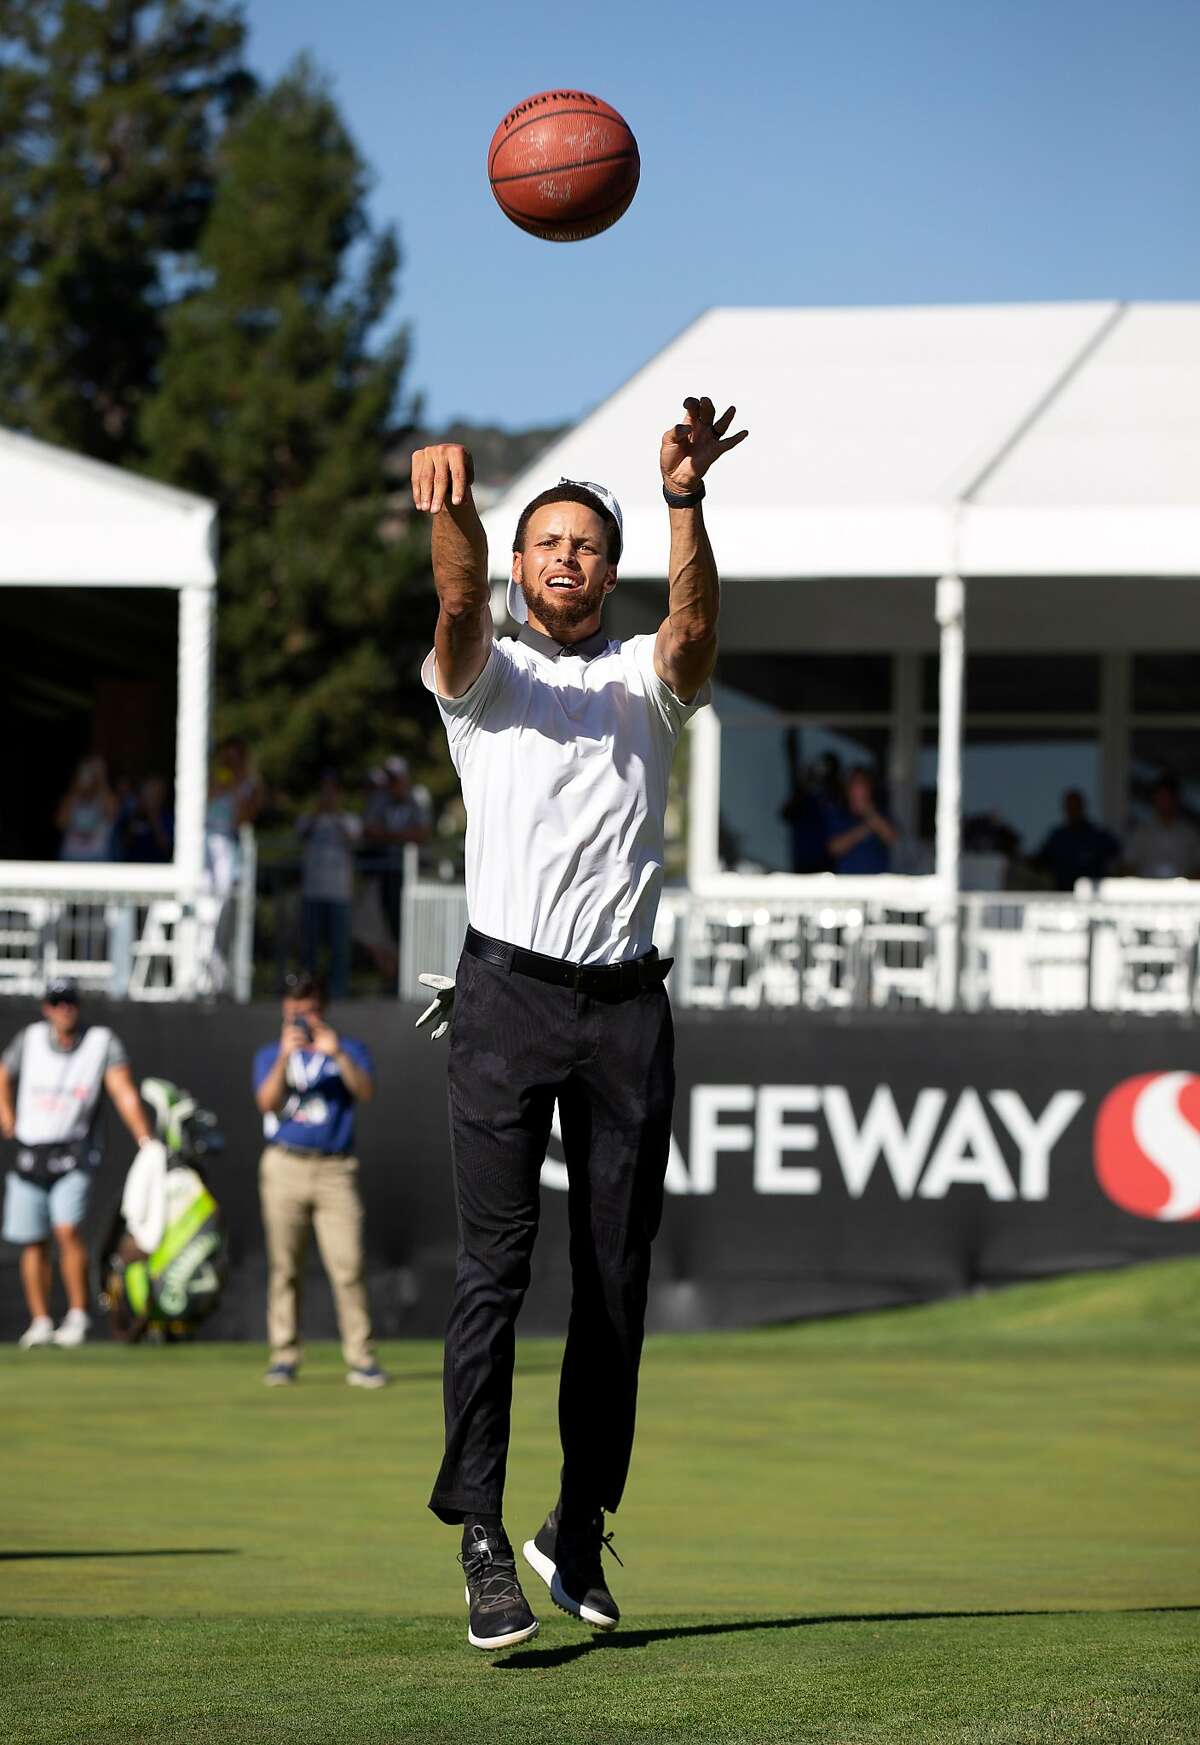 Golden State Warriors star Stephen Curry imitates his famous "shot from the tunnel" with a basketball hoop at the 17th hole during the Safeway Open pro-am golf event on Wednesday, Sept. 25, 2019 in Napa, Calif.